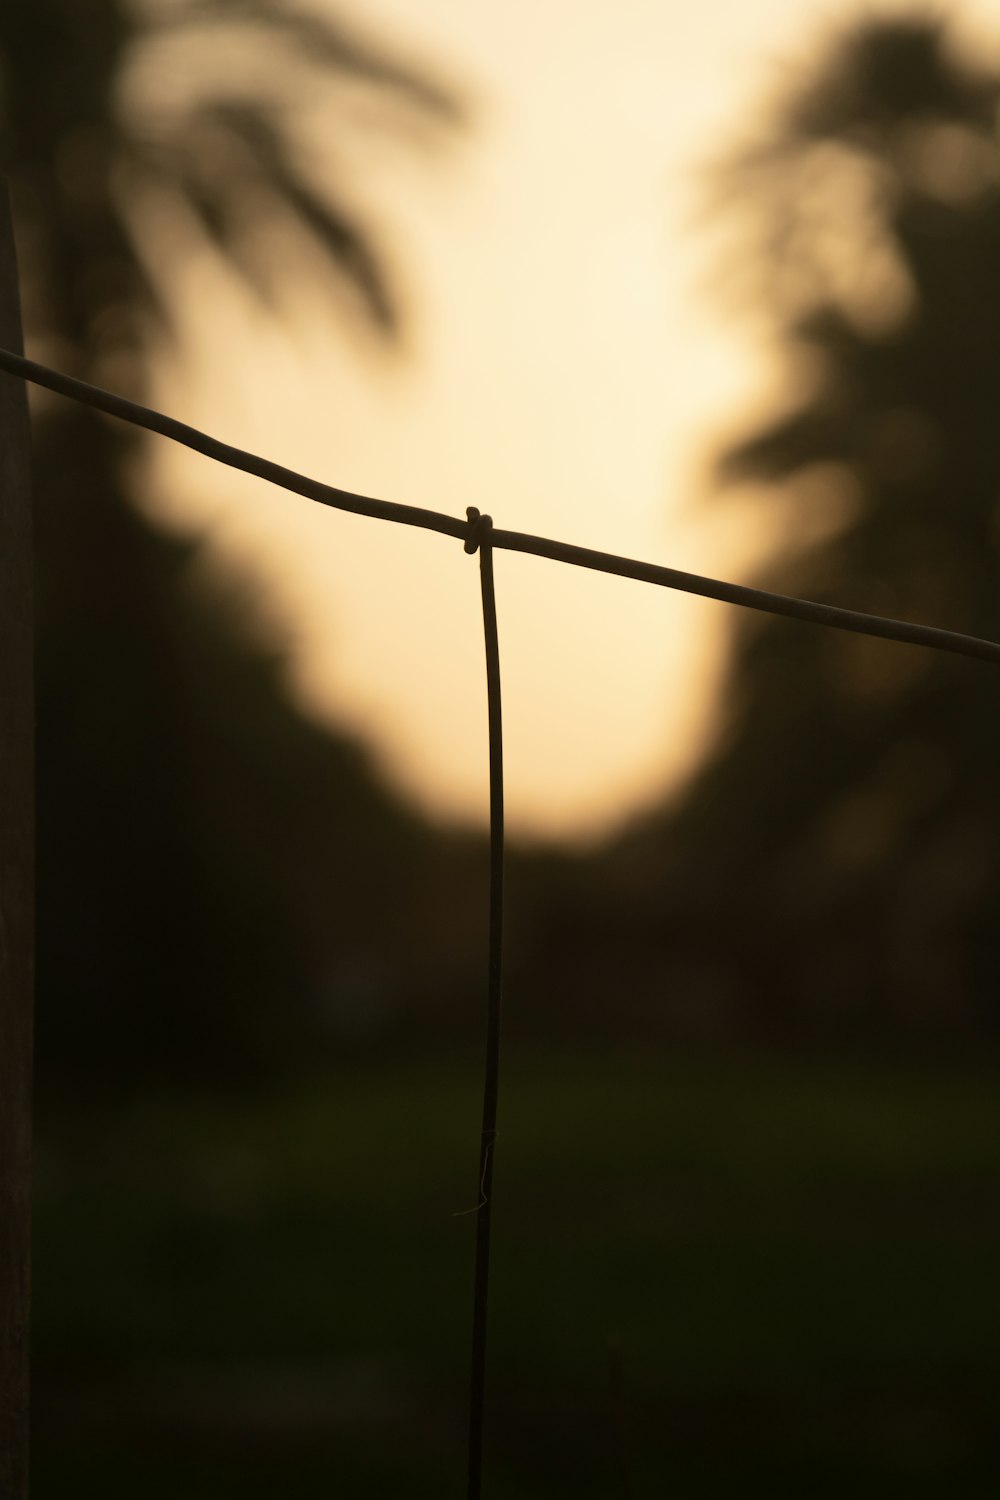 a close up of a wire fence with trees in the background